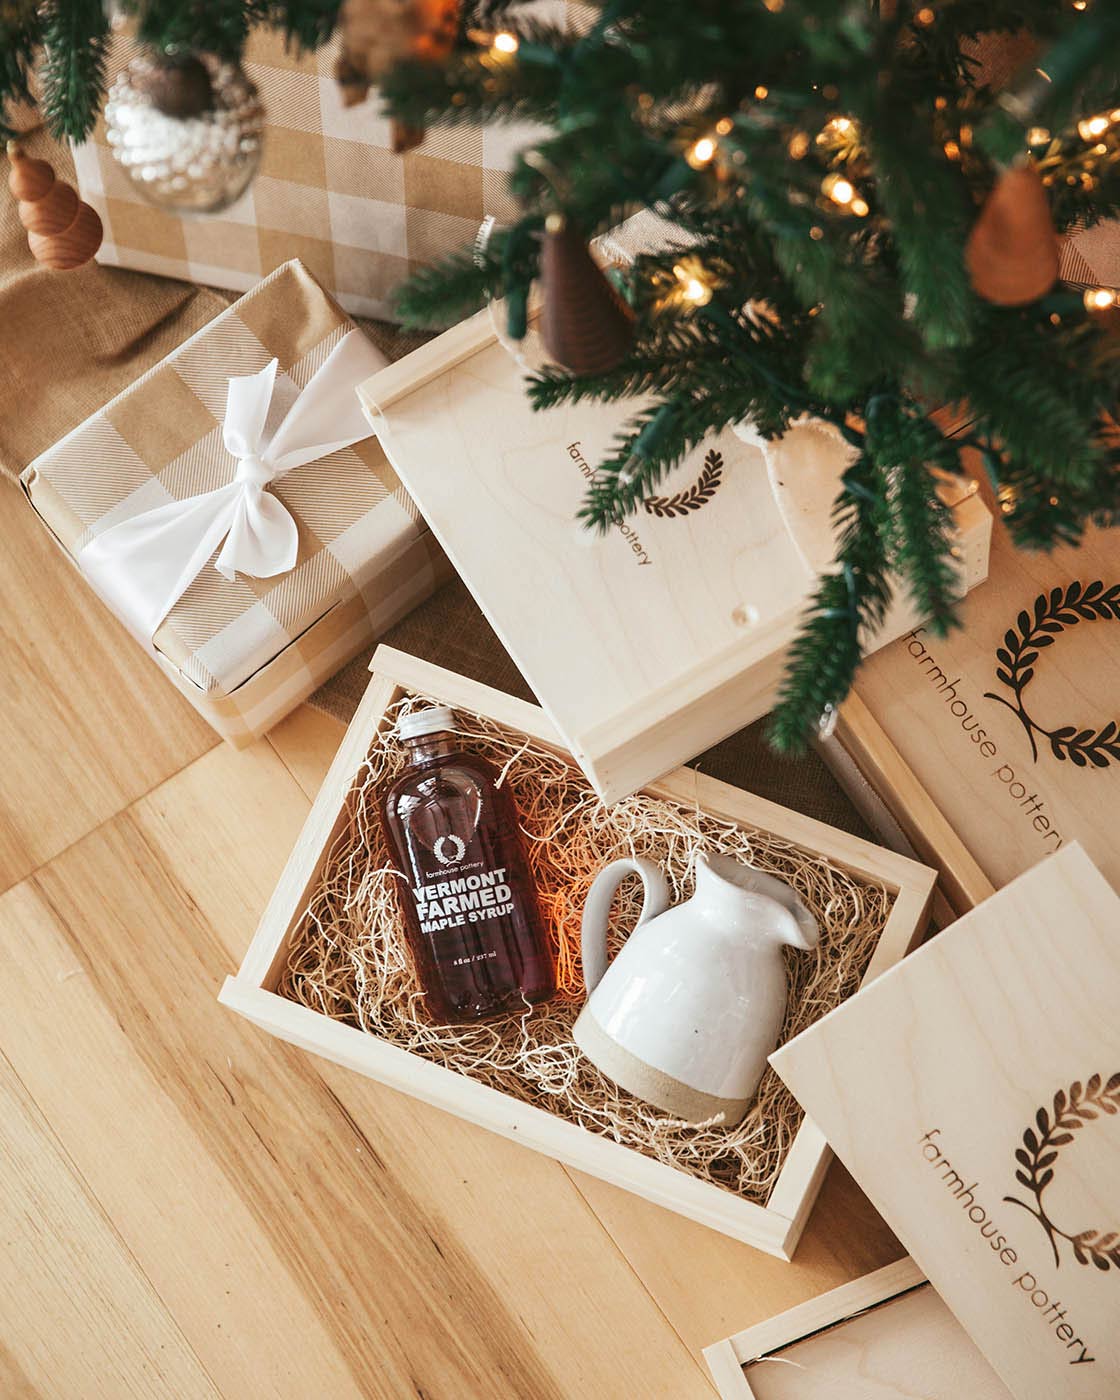 The Maple Syrup and Bell Pitcher Gift Set under a holiday tree